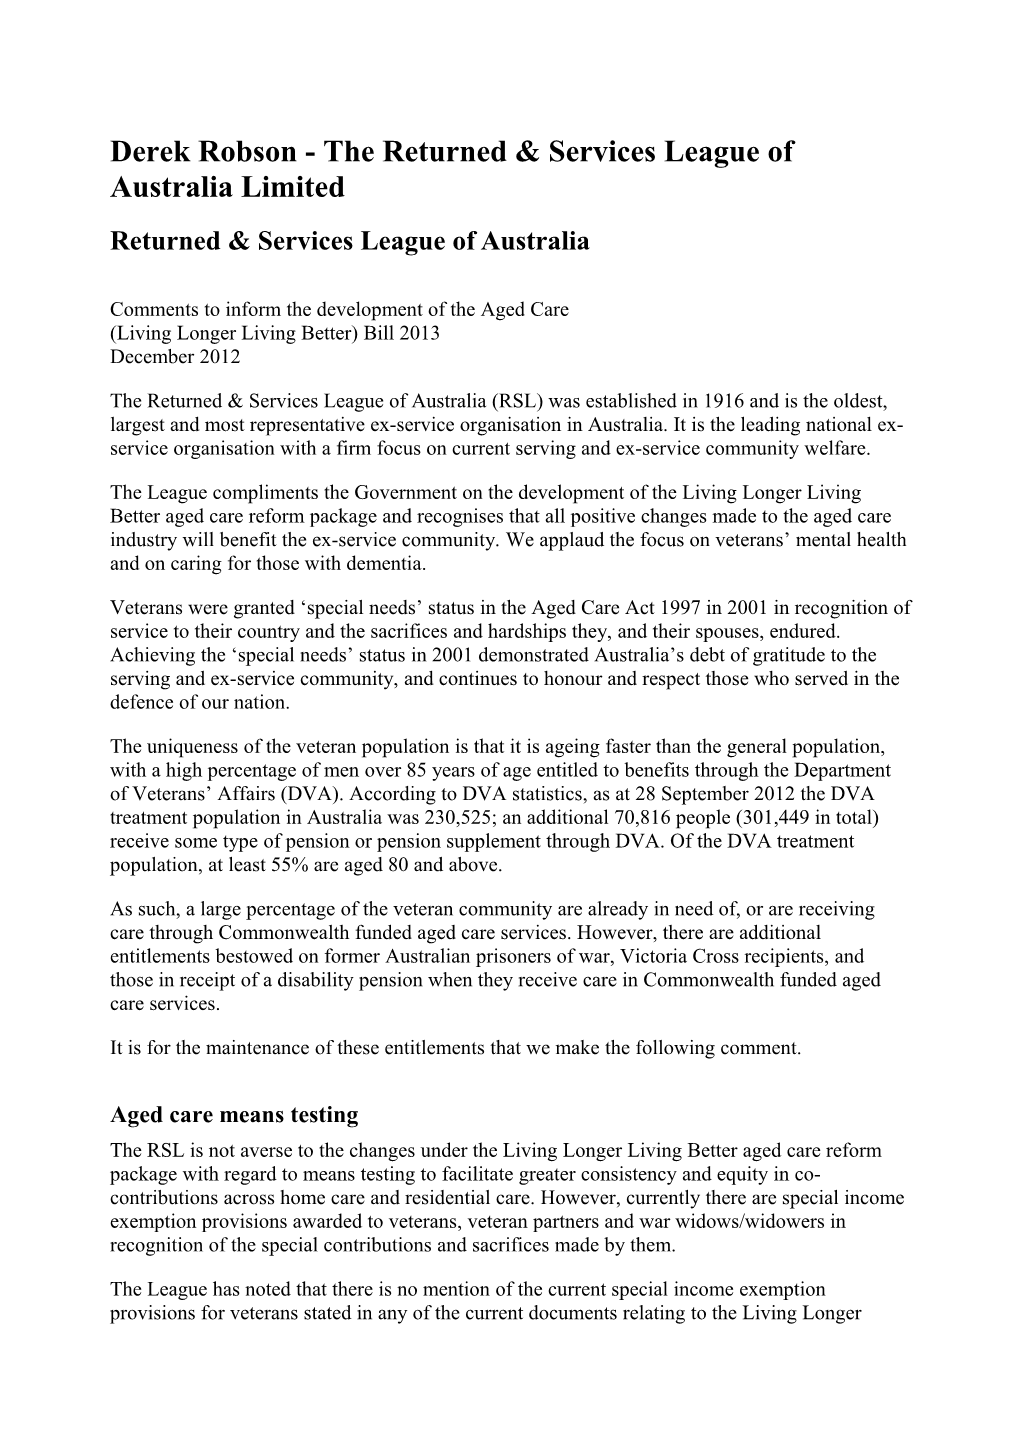 Derek Robson - the Returned & Services League of Australia Limited